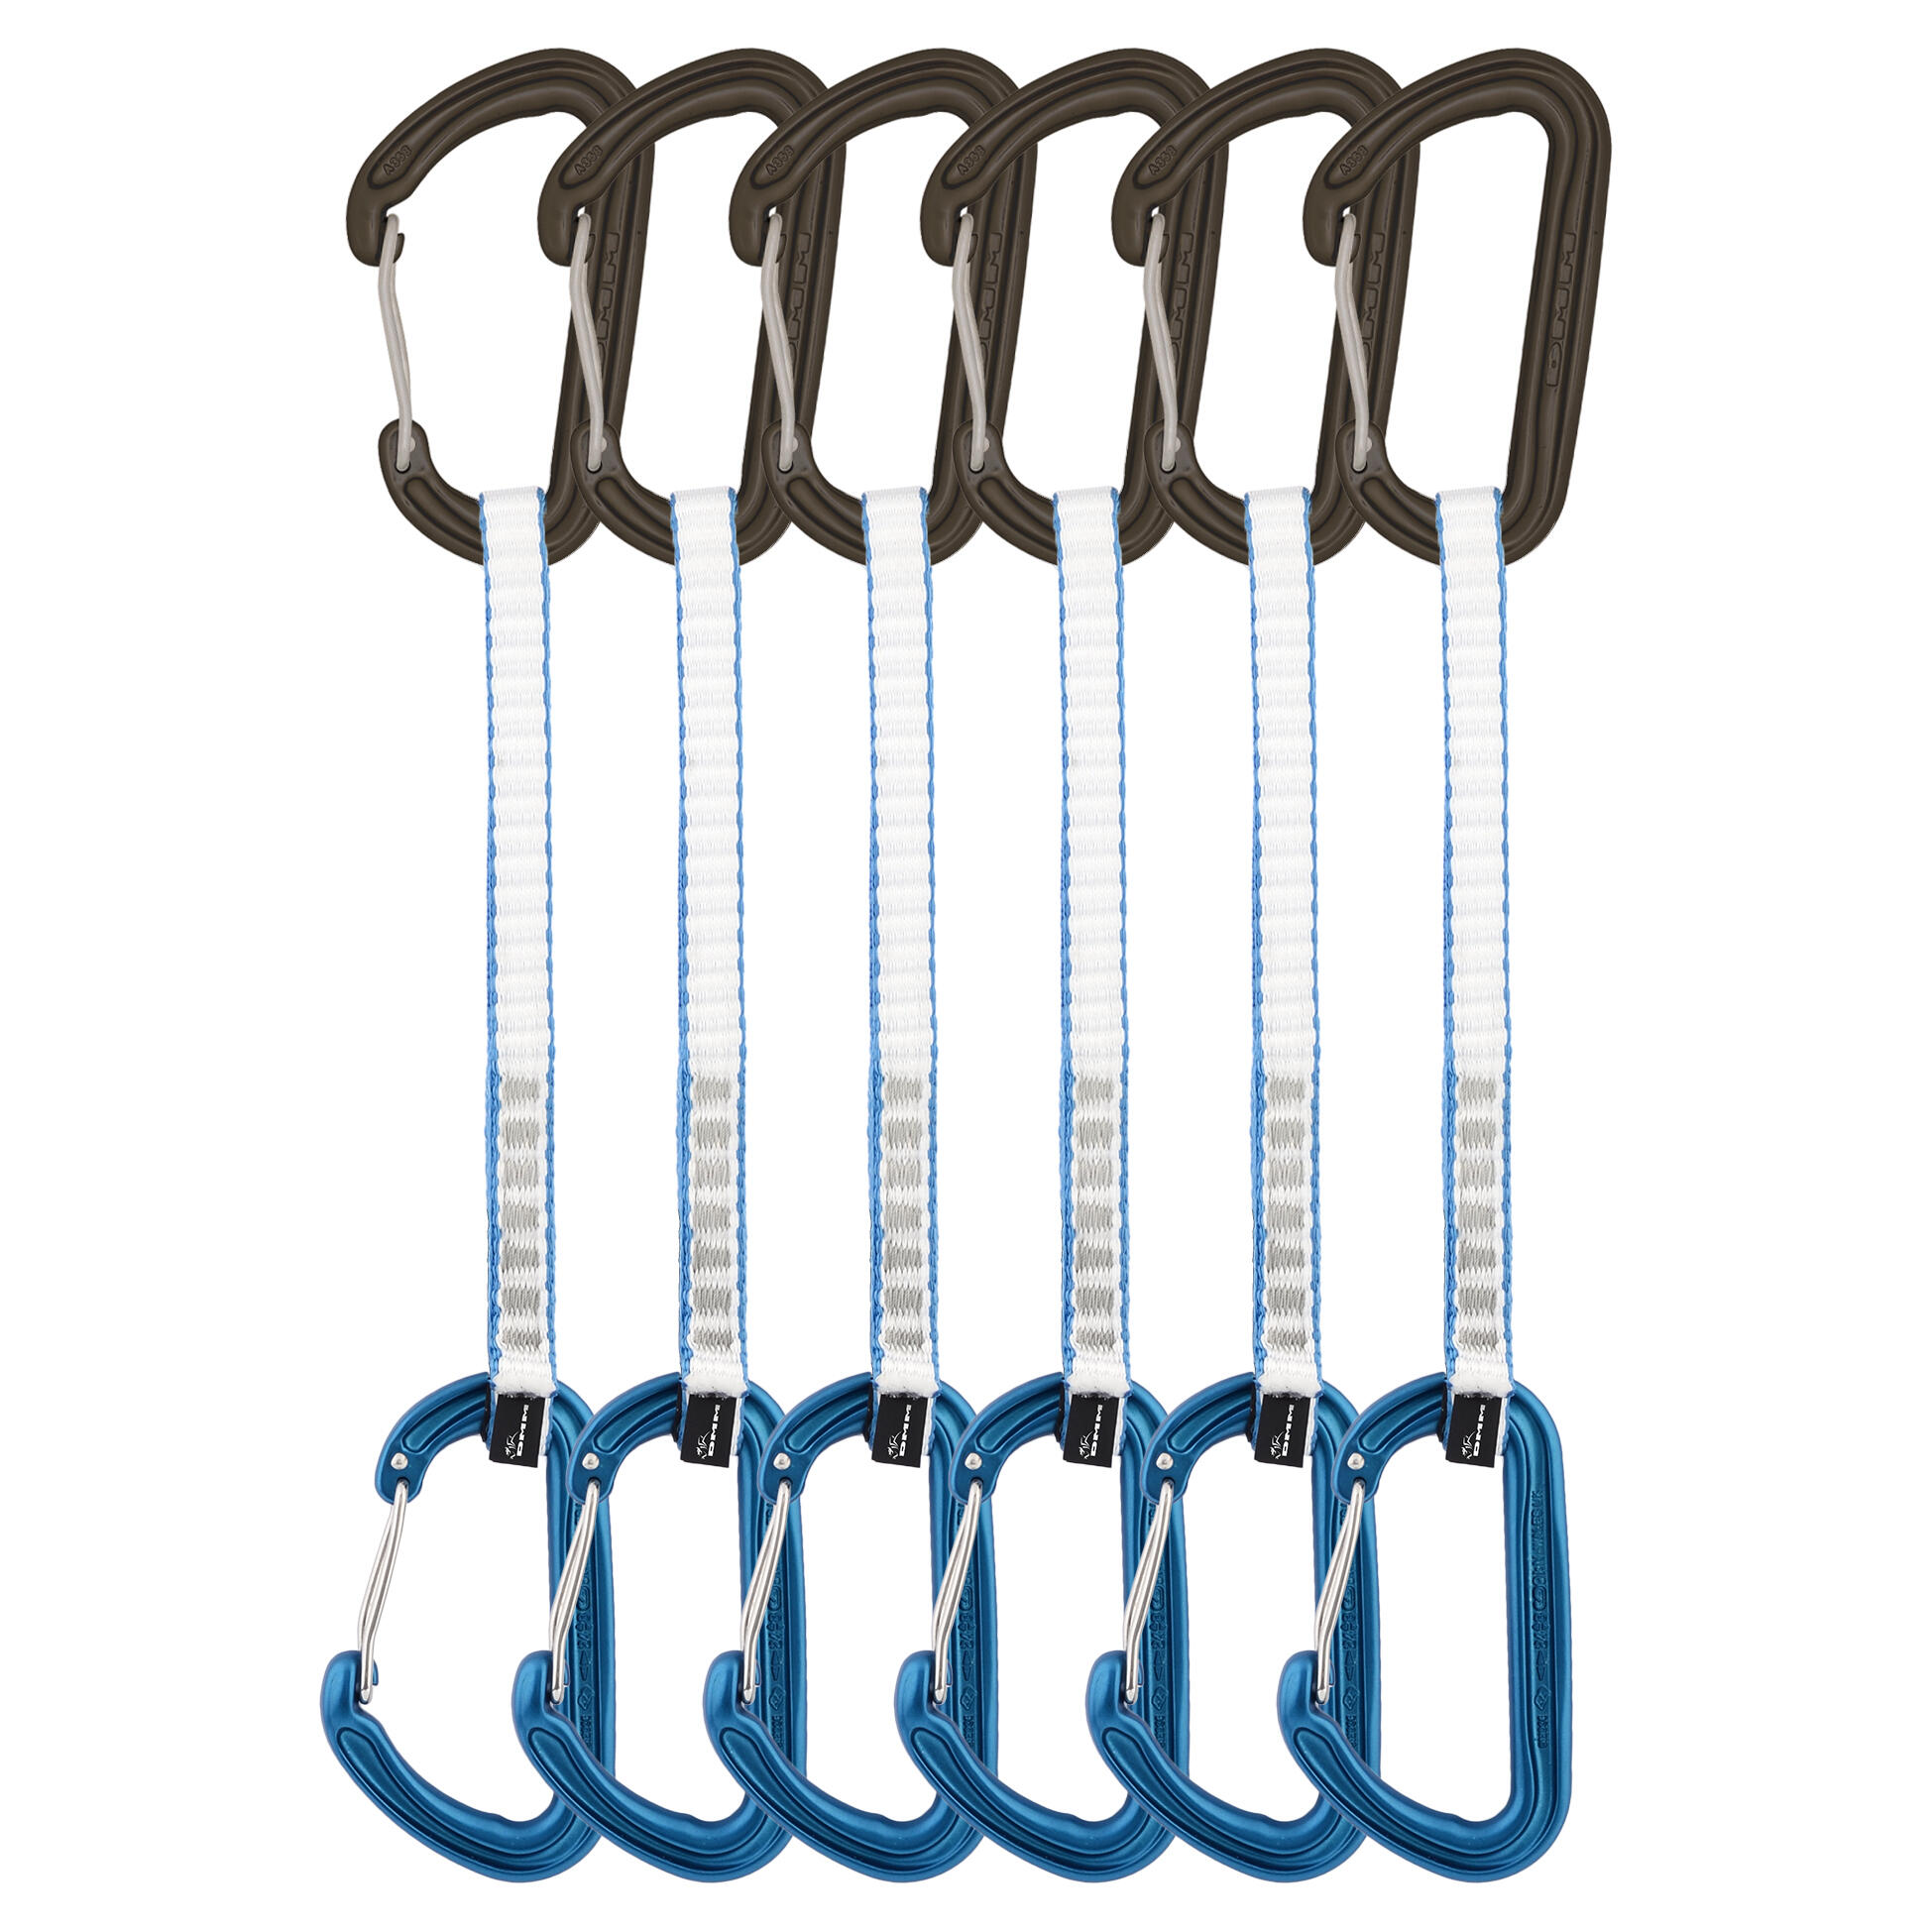 Spectre Quickdraw 18cm - Blue - 6 Pack 1/3